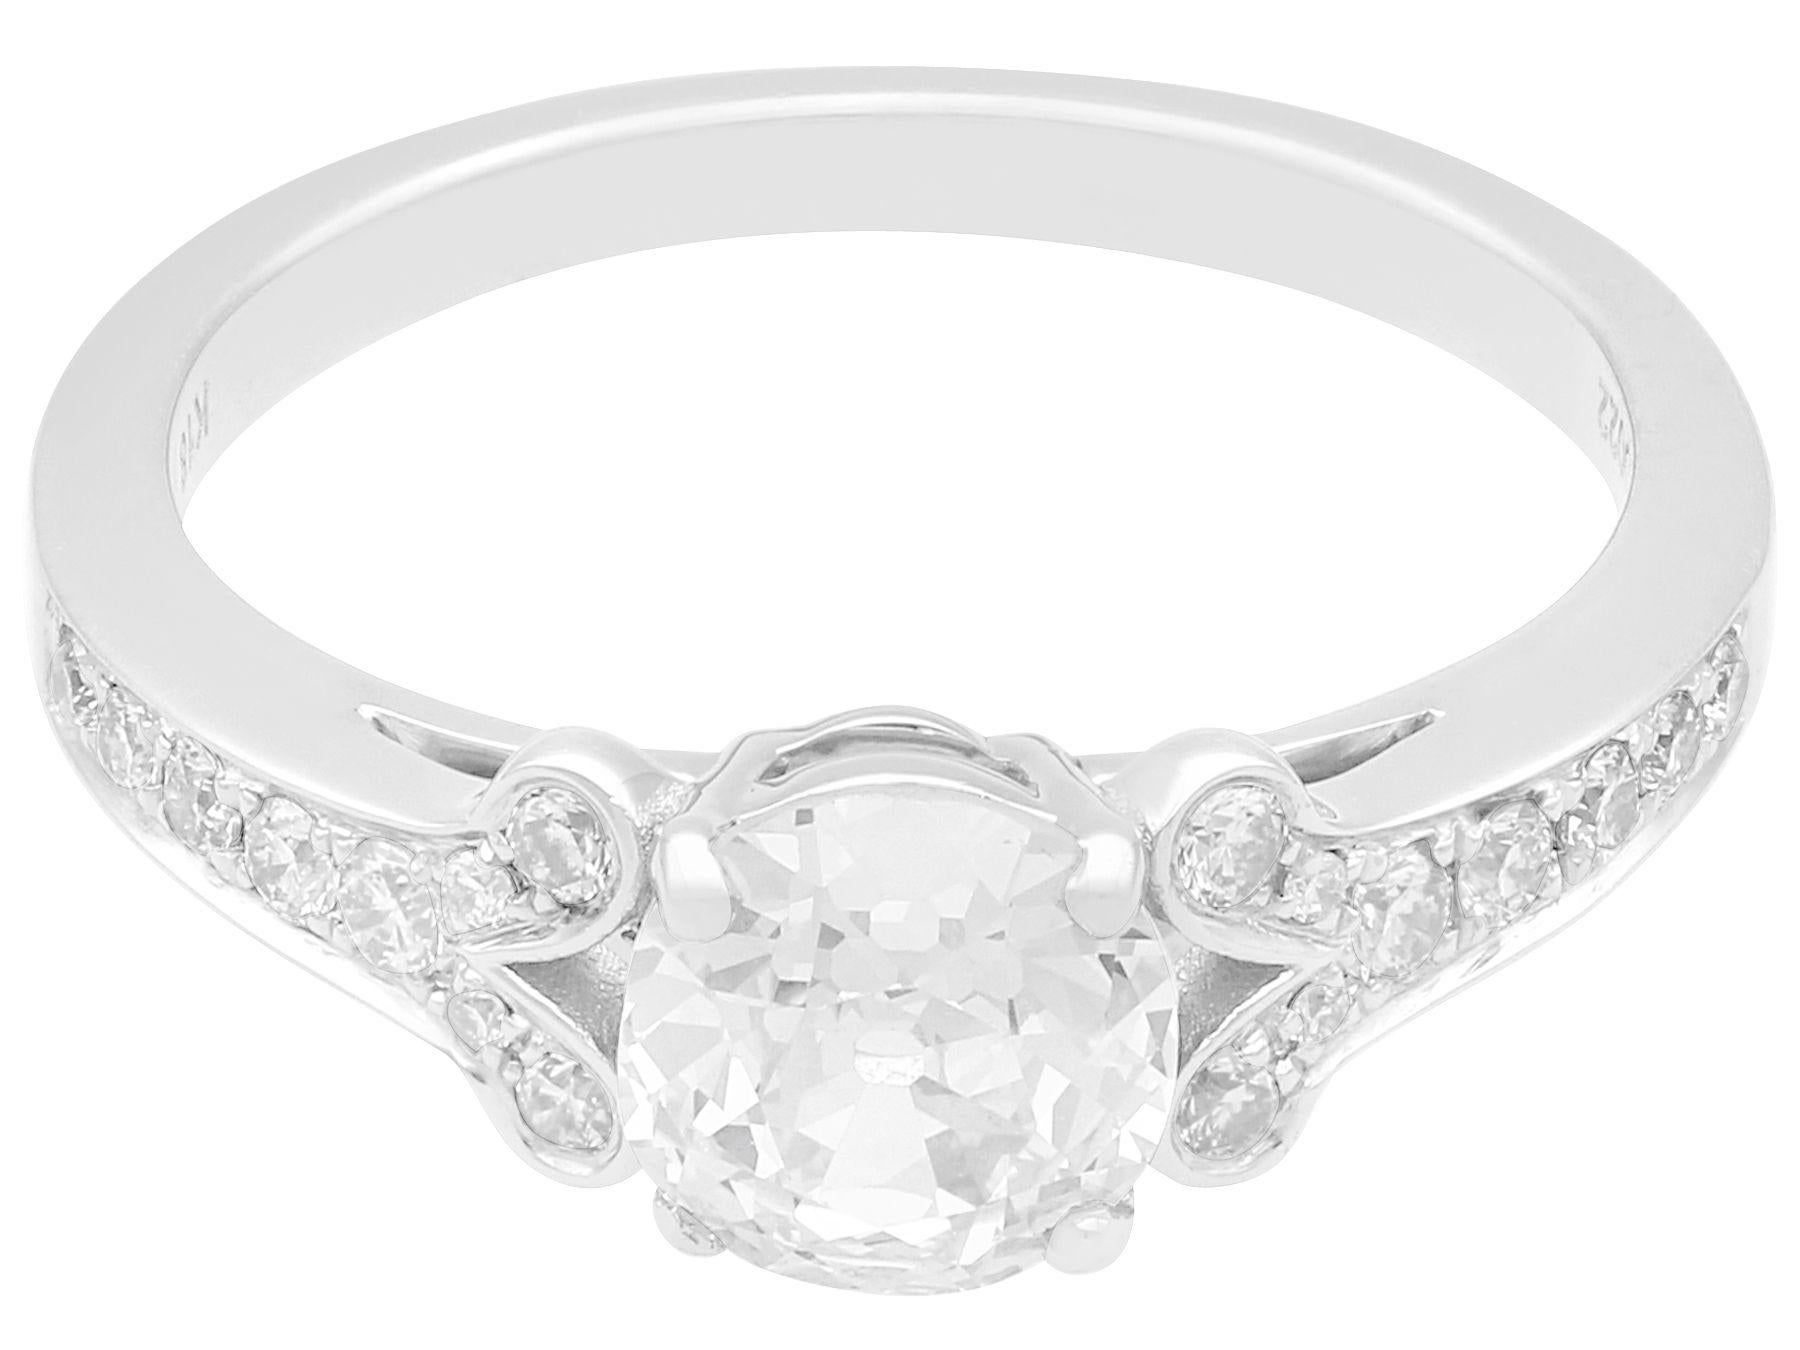 Cushion Cut 1.42 Carat Diamond and White Gold Solitaire Engagement Ring For Sale